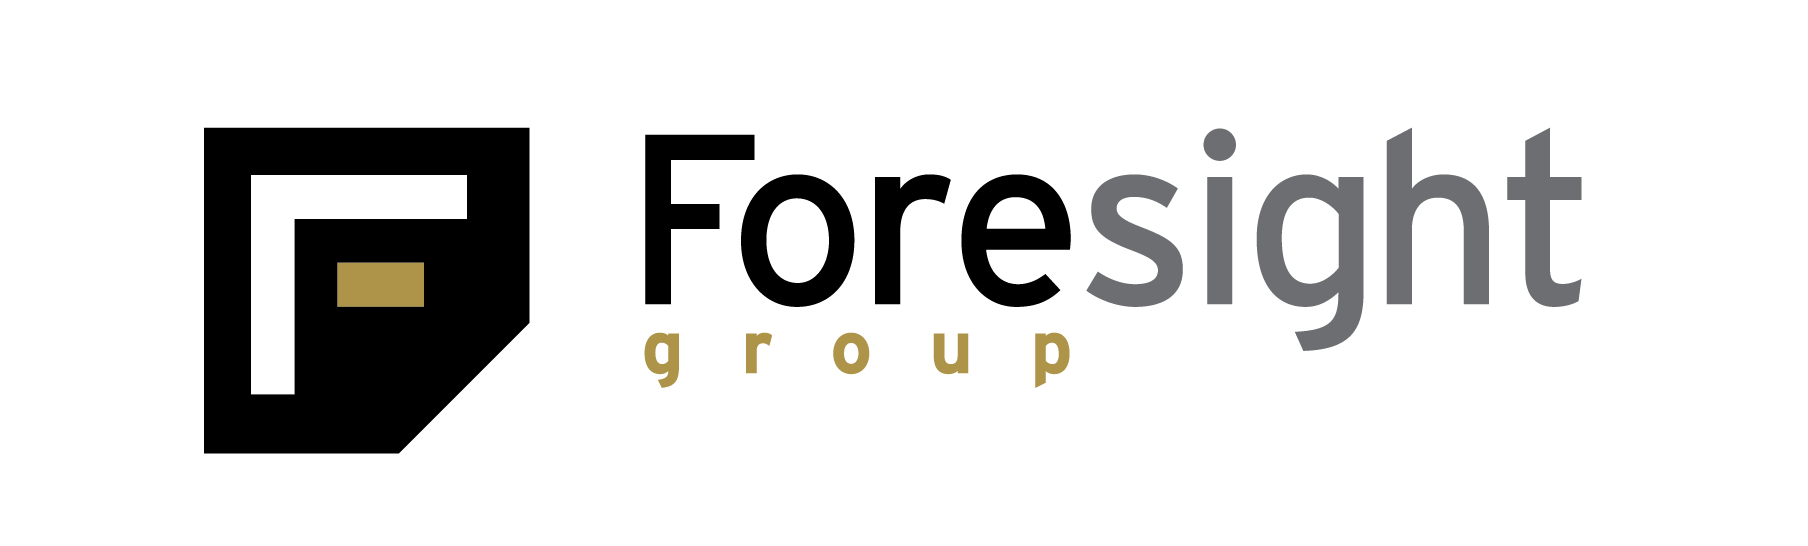 Foresight Logo - Foresight Group Business Bank British Business Bank